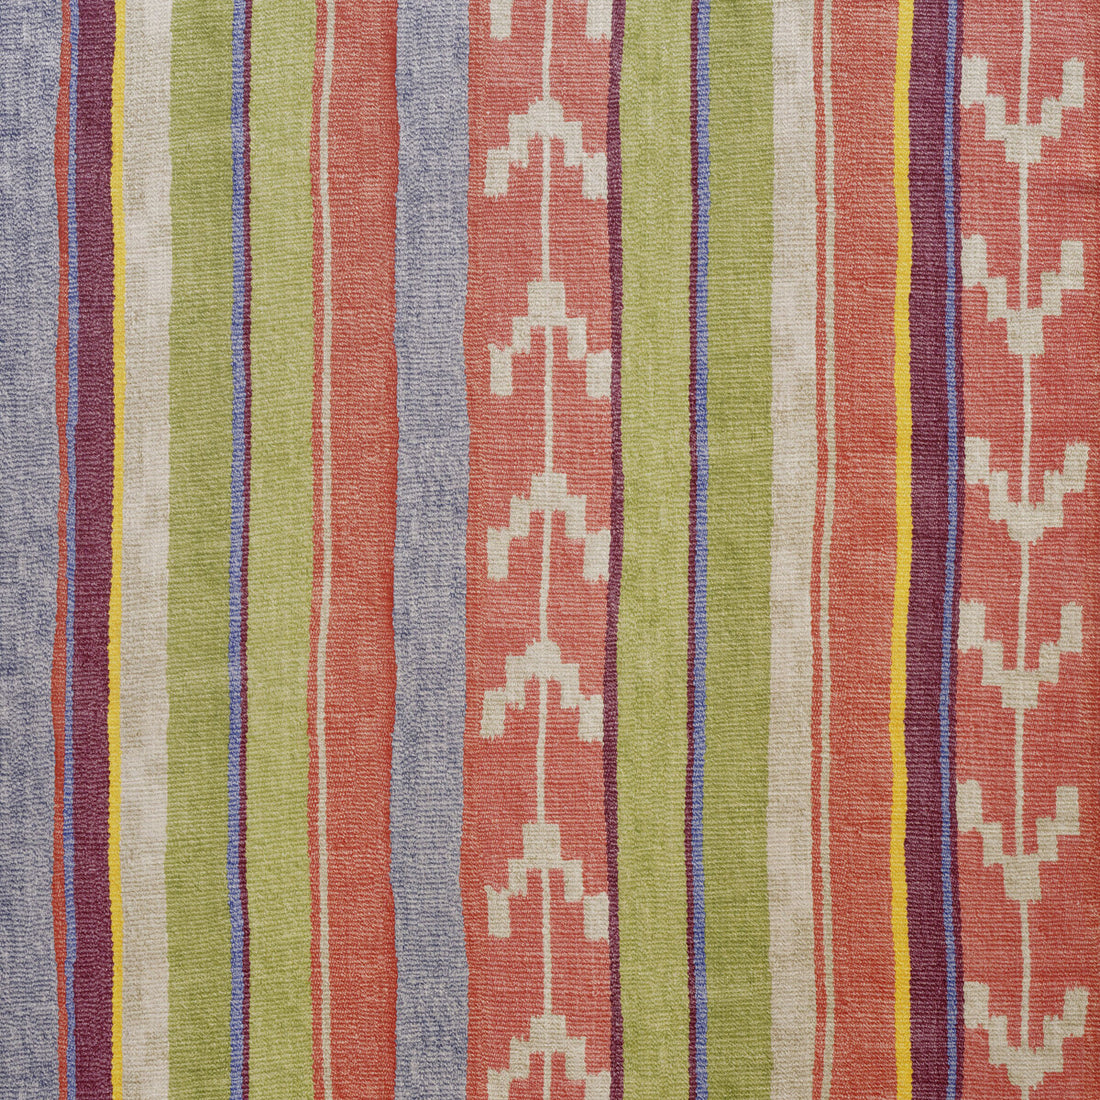 Indus fabric in multi color - pattern AM100338.310.0 - by Kravet Couture in the Andrew Martin Hindukush collection